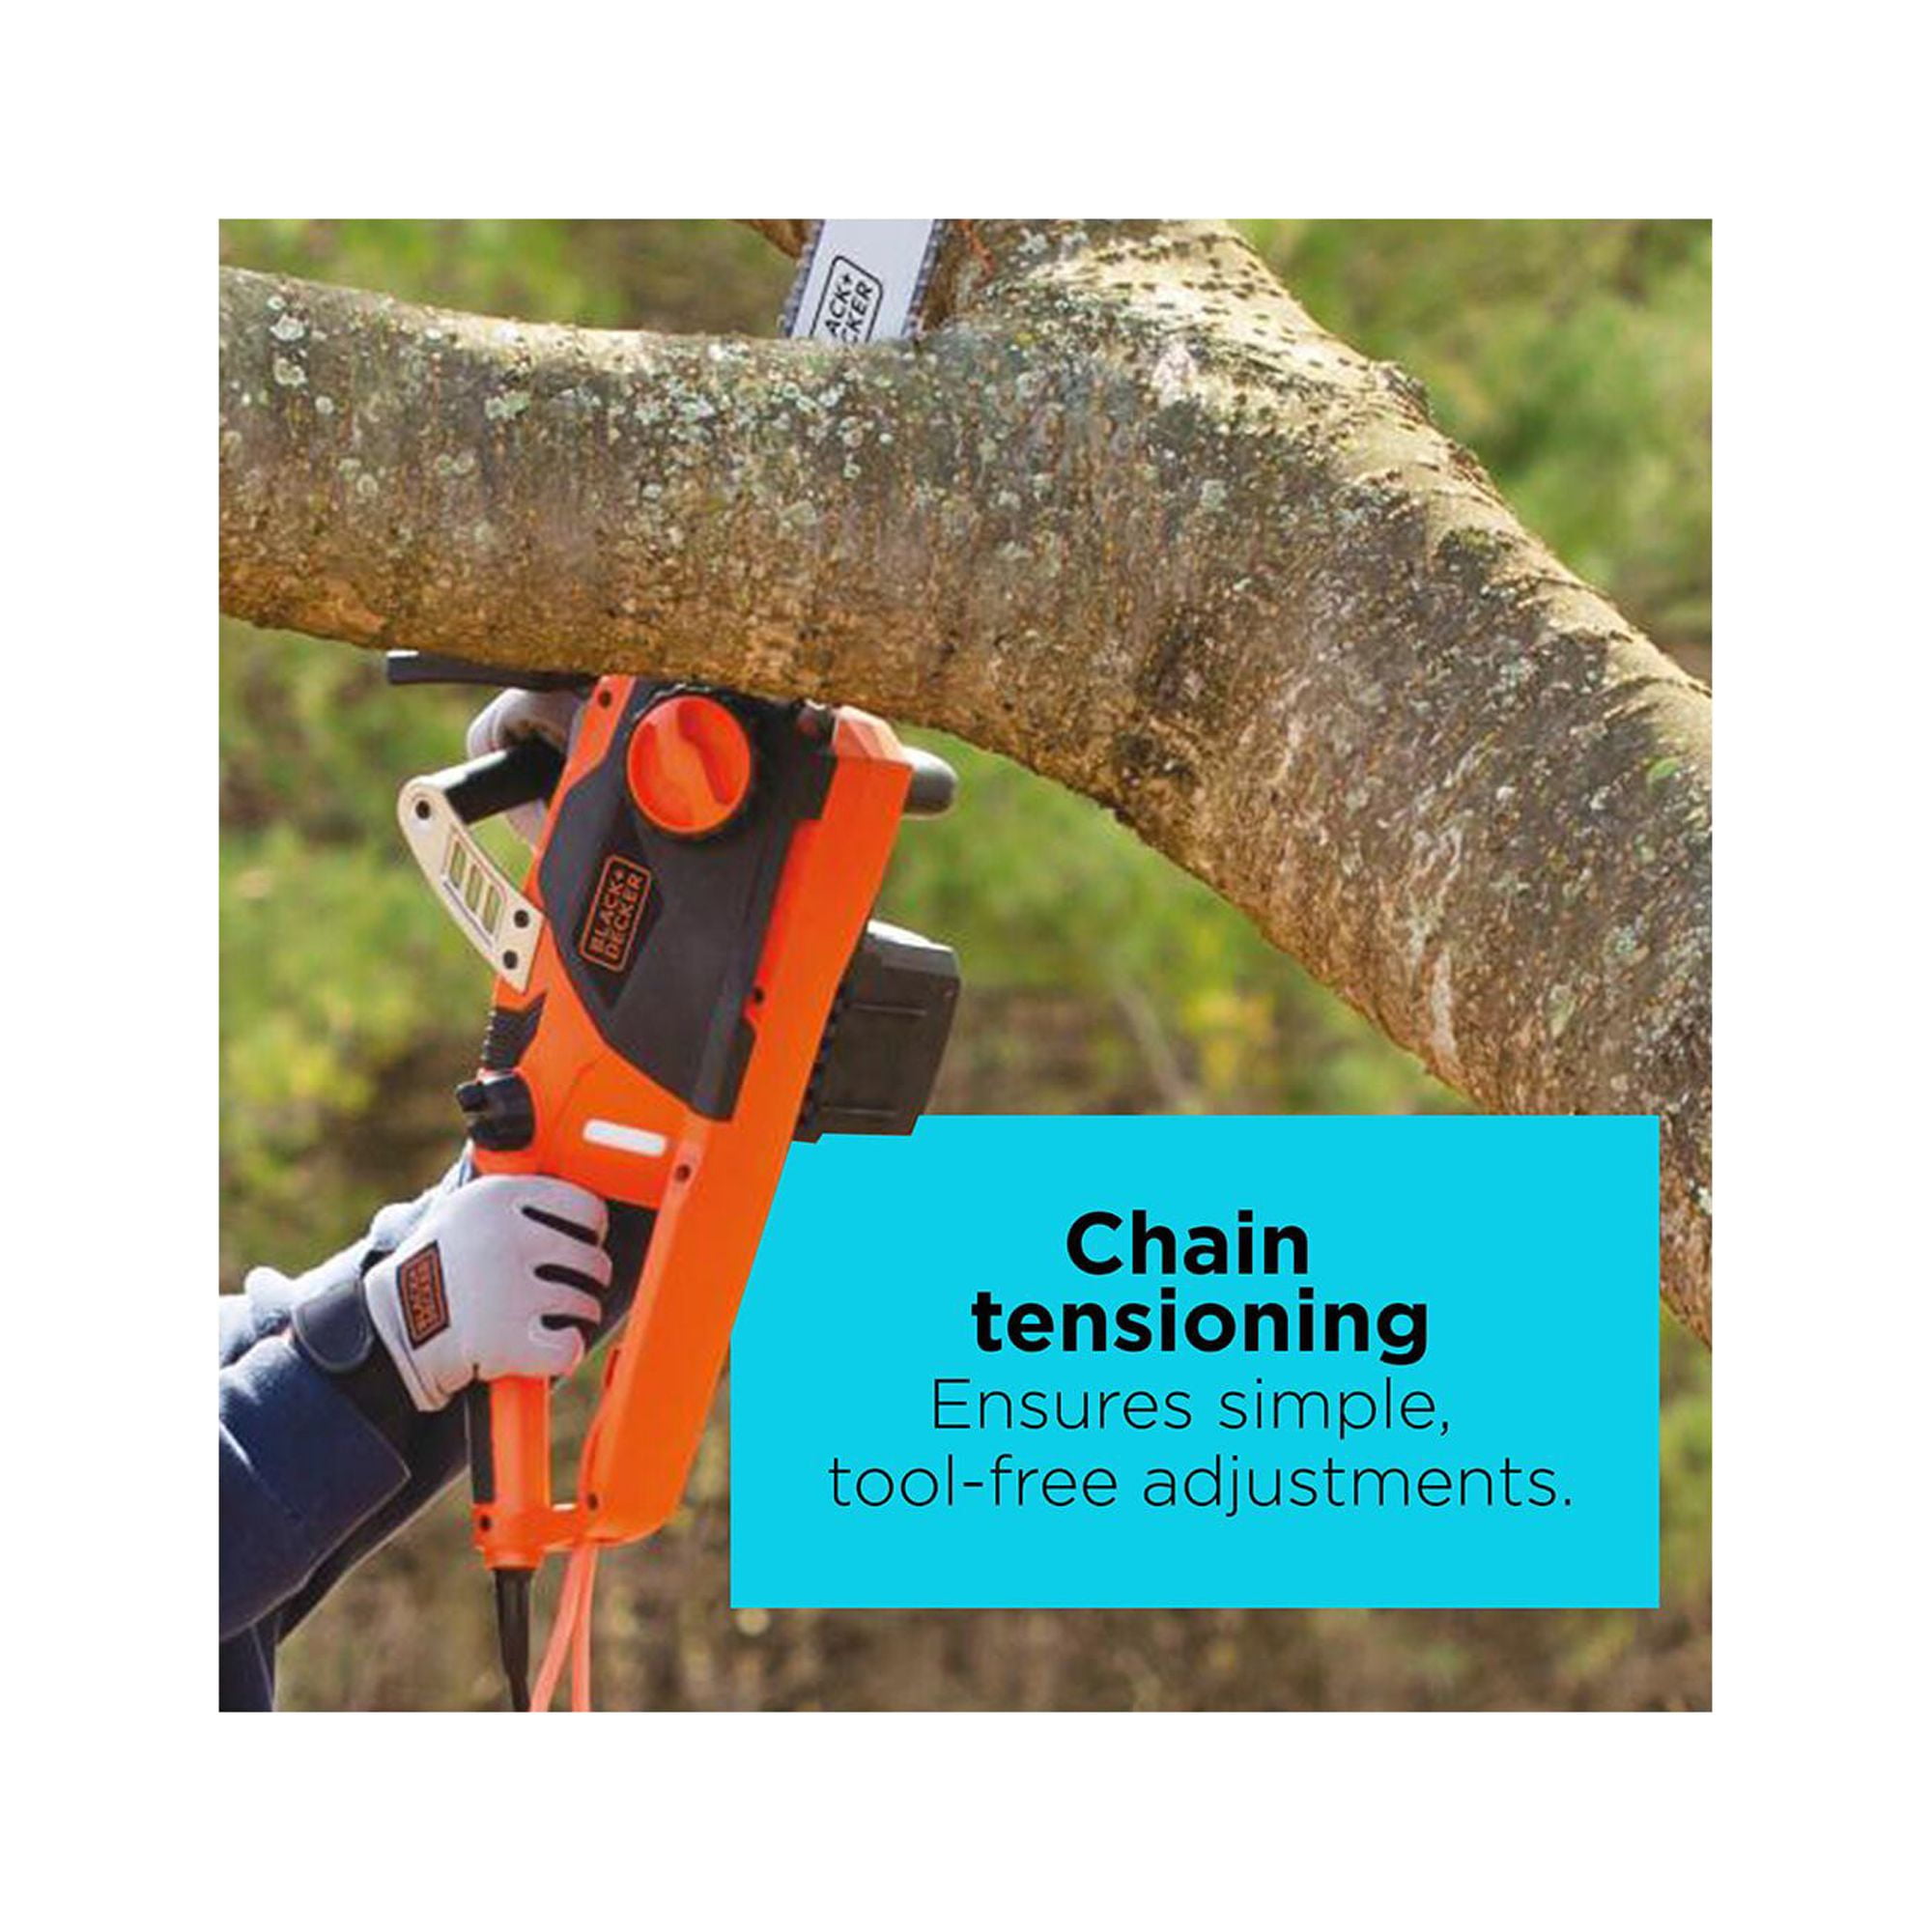 Replacement Oregon Chain for Black & Decker CS1518 15-Amp Corded Chainsaw,  18-Inch (9162)